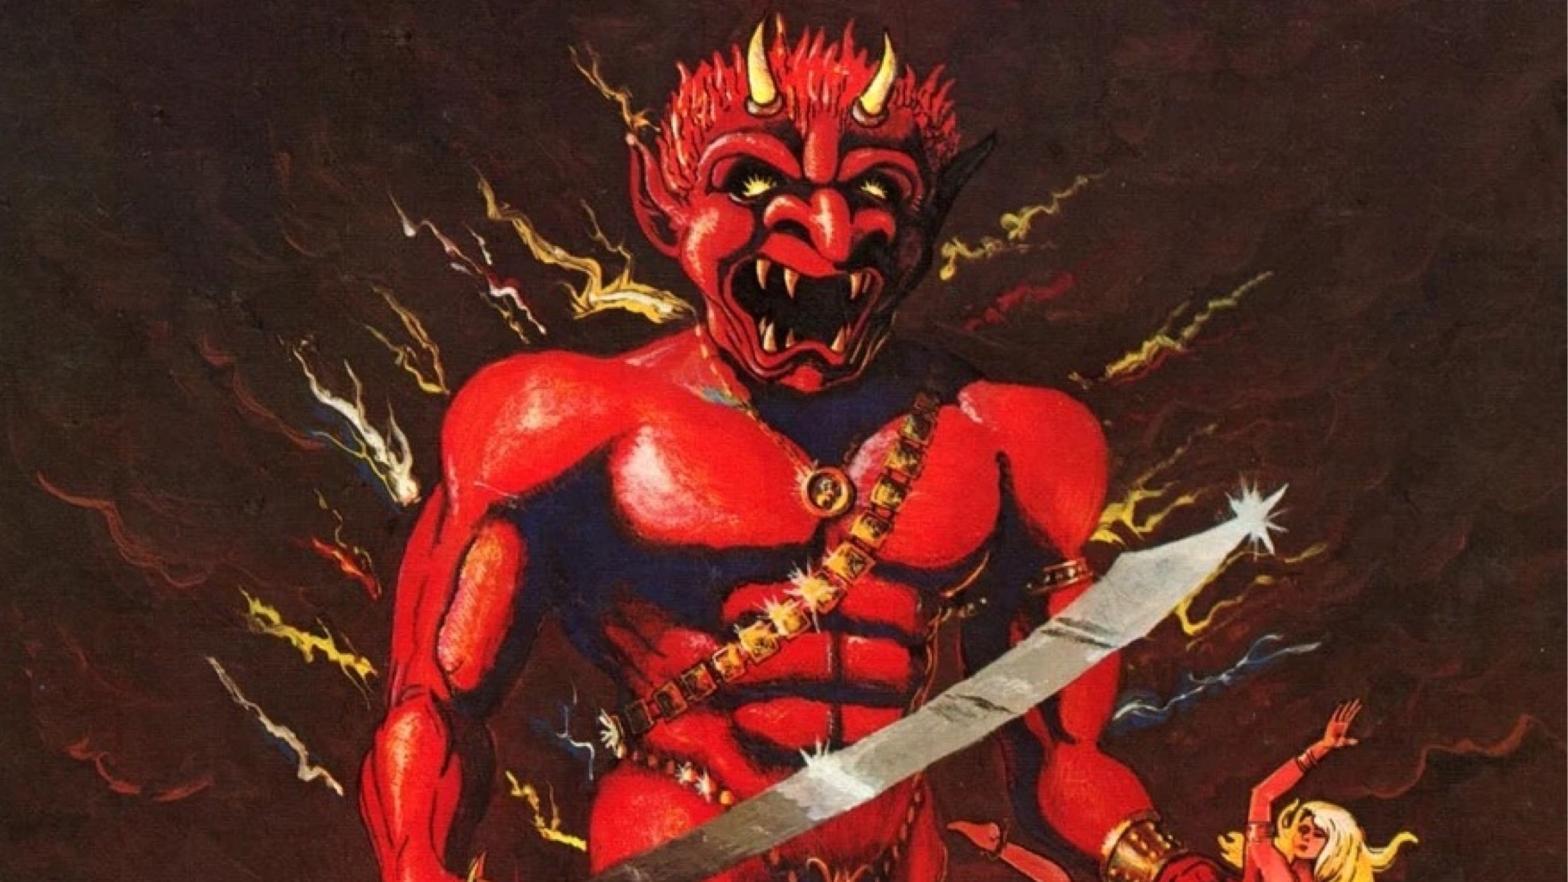 Inset of the cover to AD&D 1st Edition Dungeon Master's Guide by David C. Sutherland III. (Image: Wizards of the Coast)